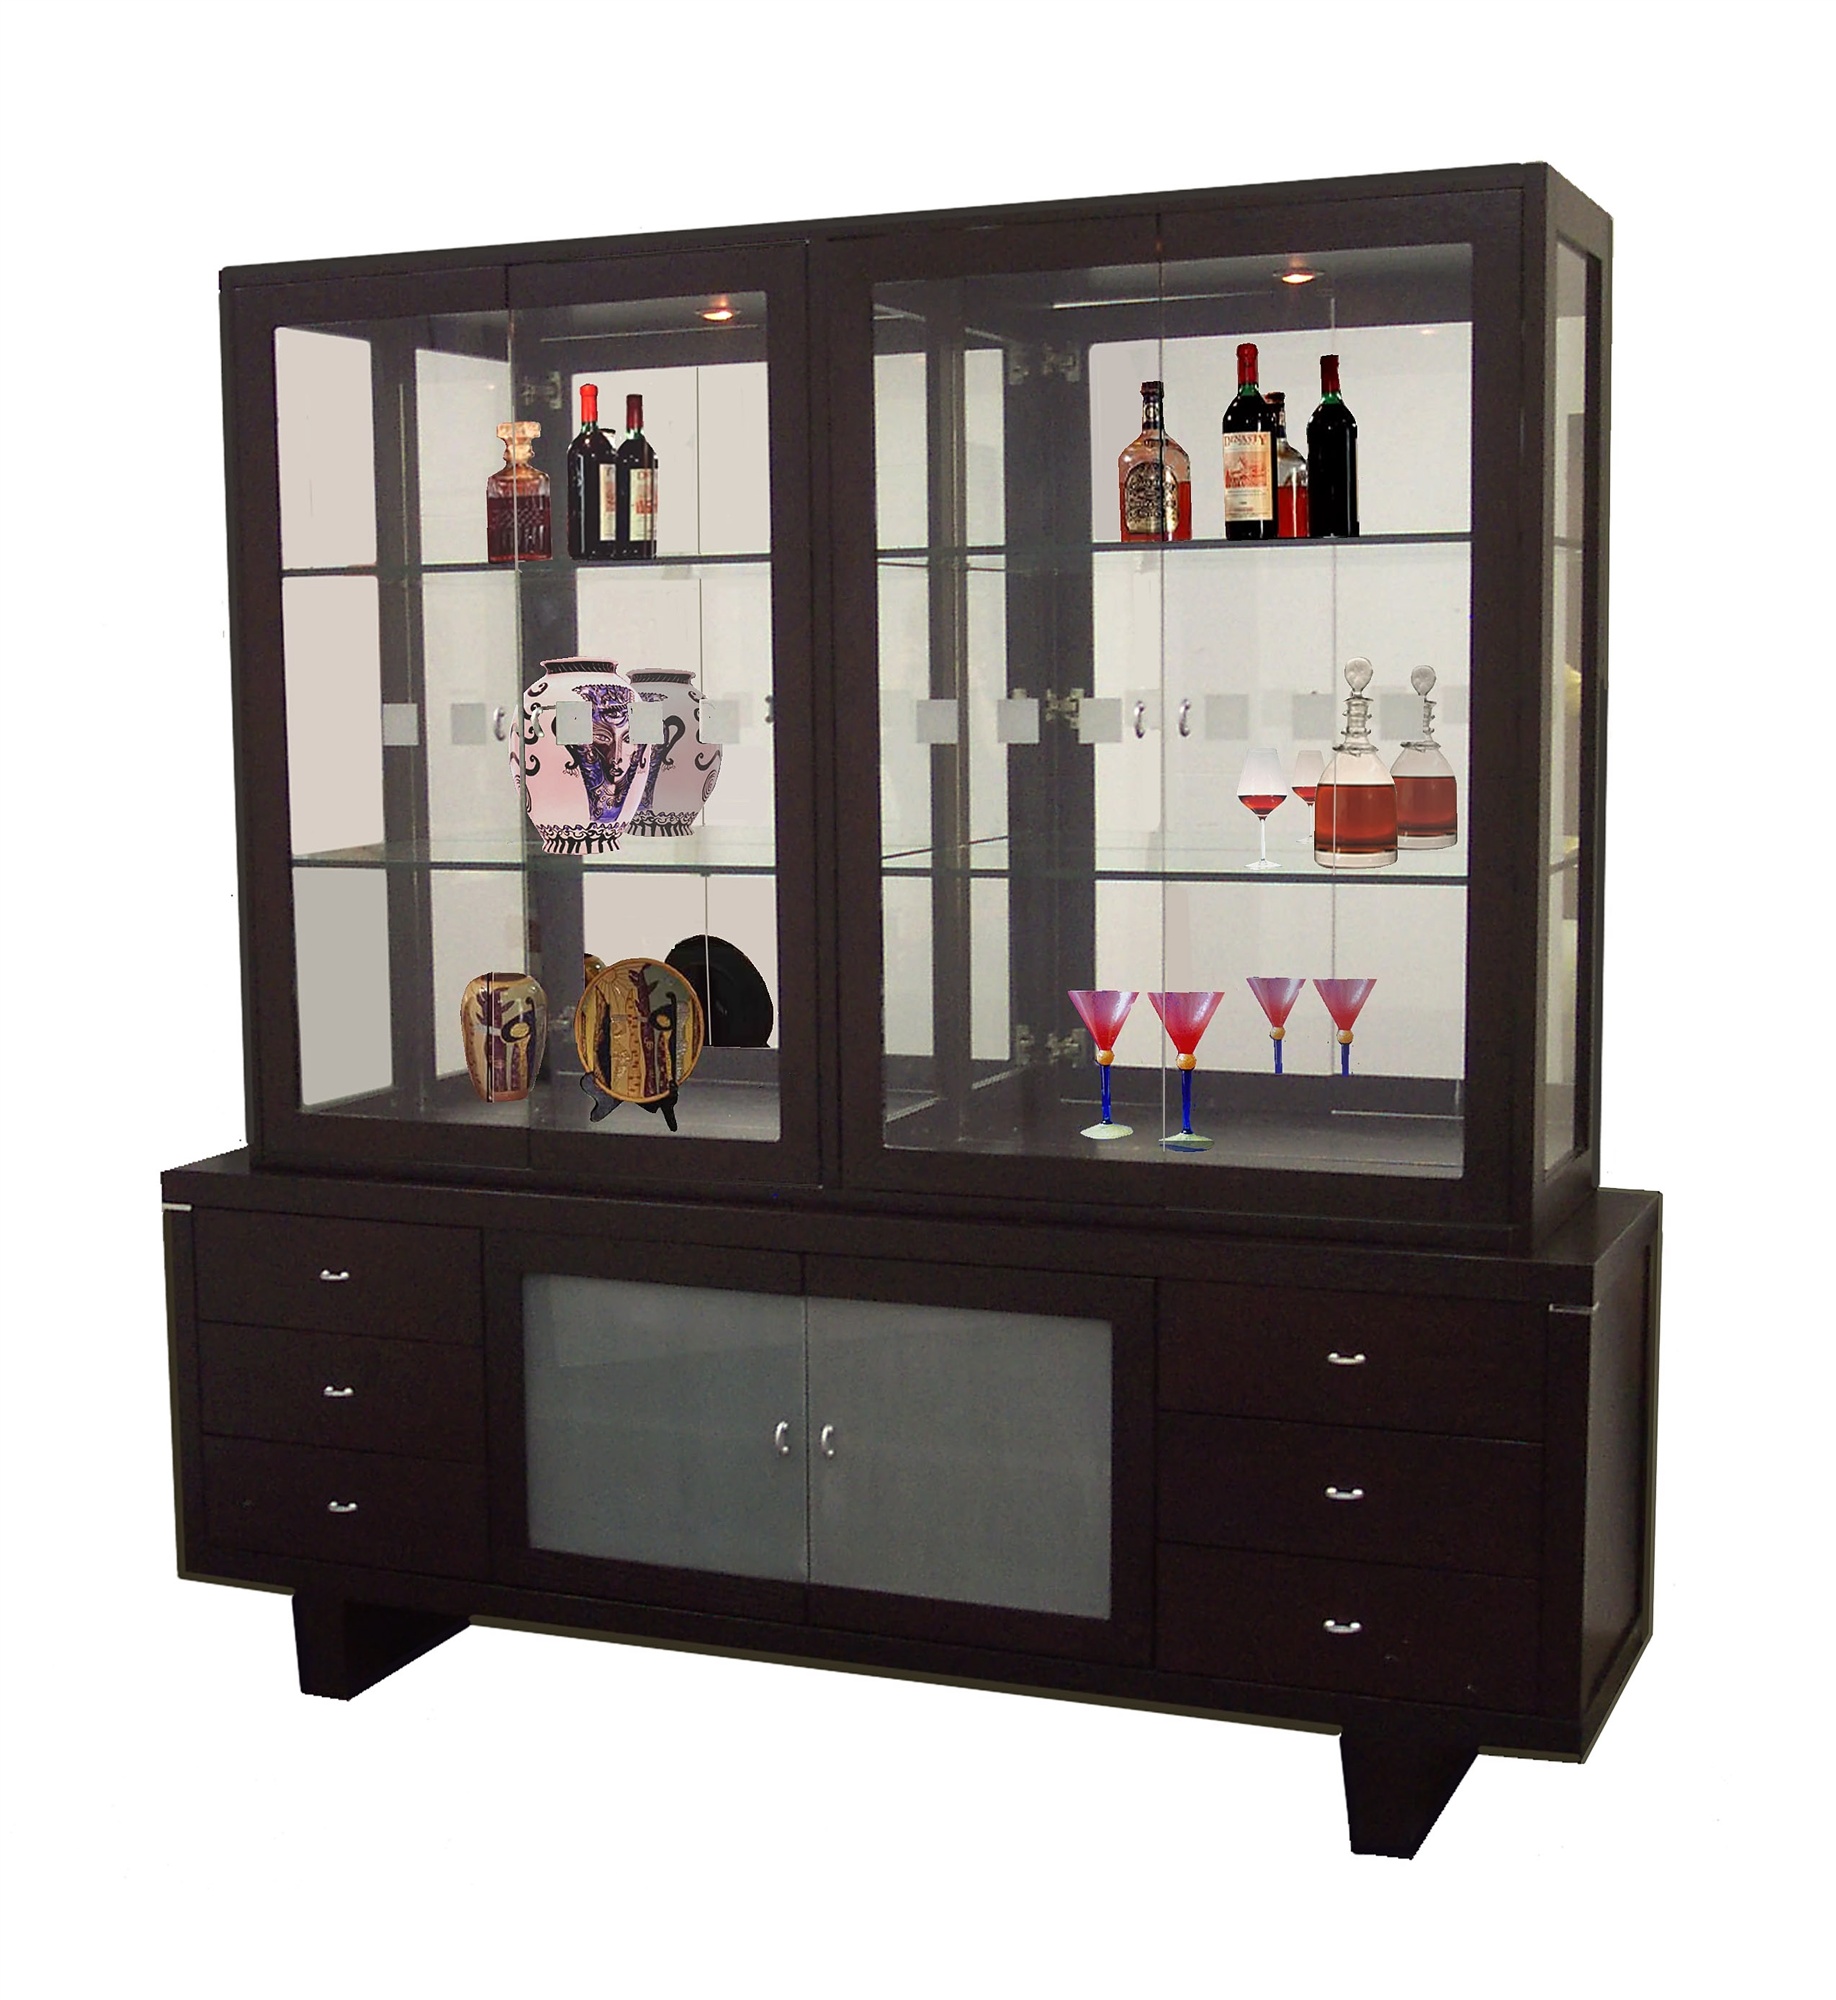 Contemporary hutch ikea hutch dining frisch photo of contemporary buffet and hutch with glass KUGDWFB